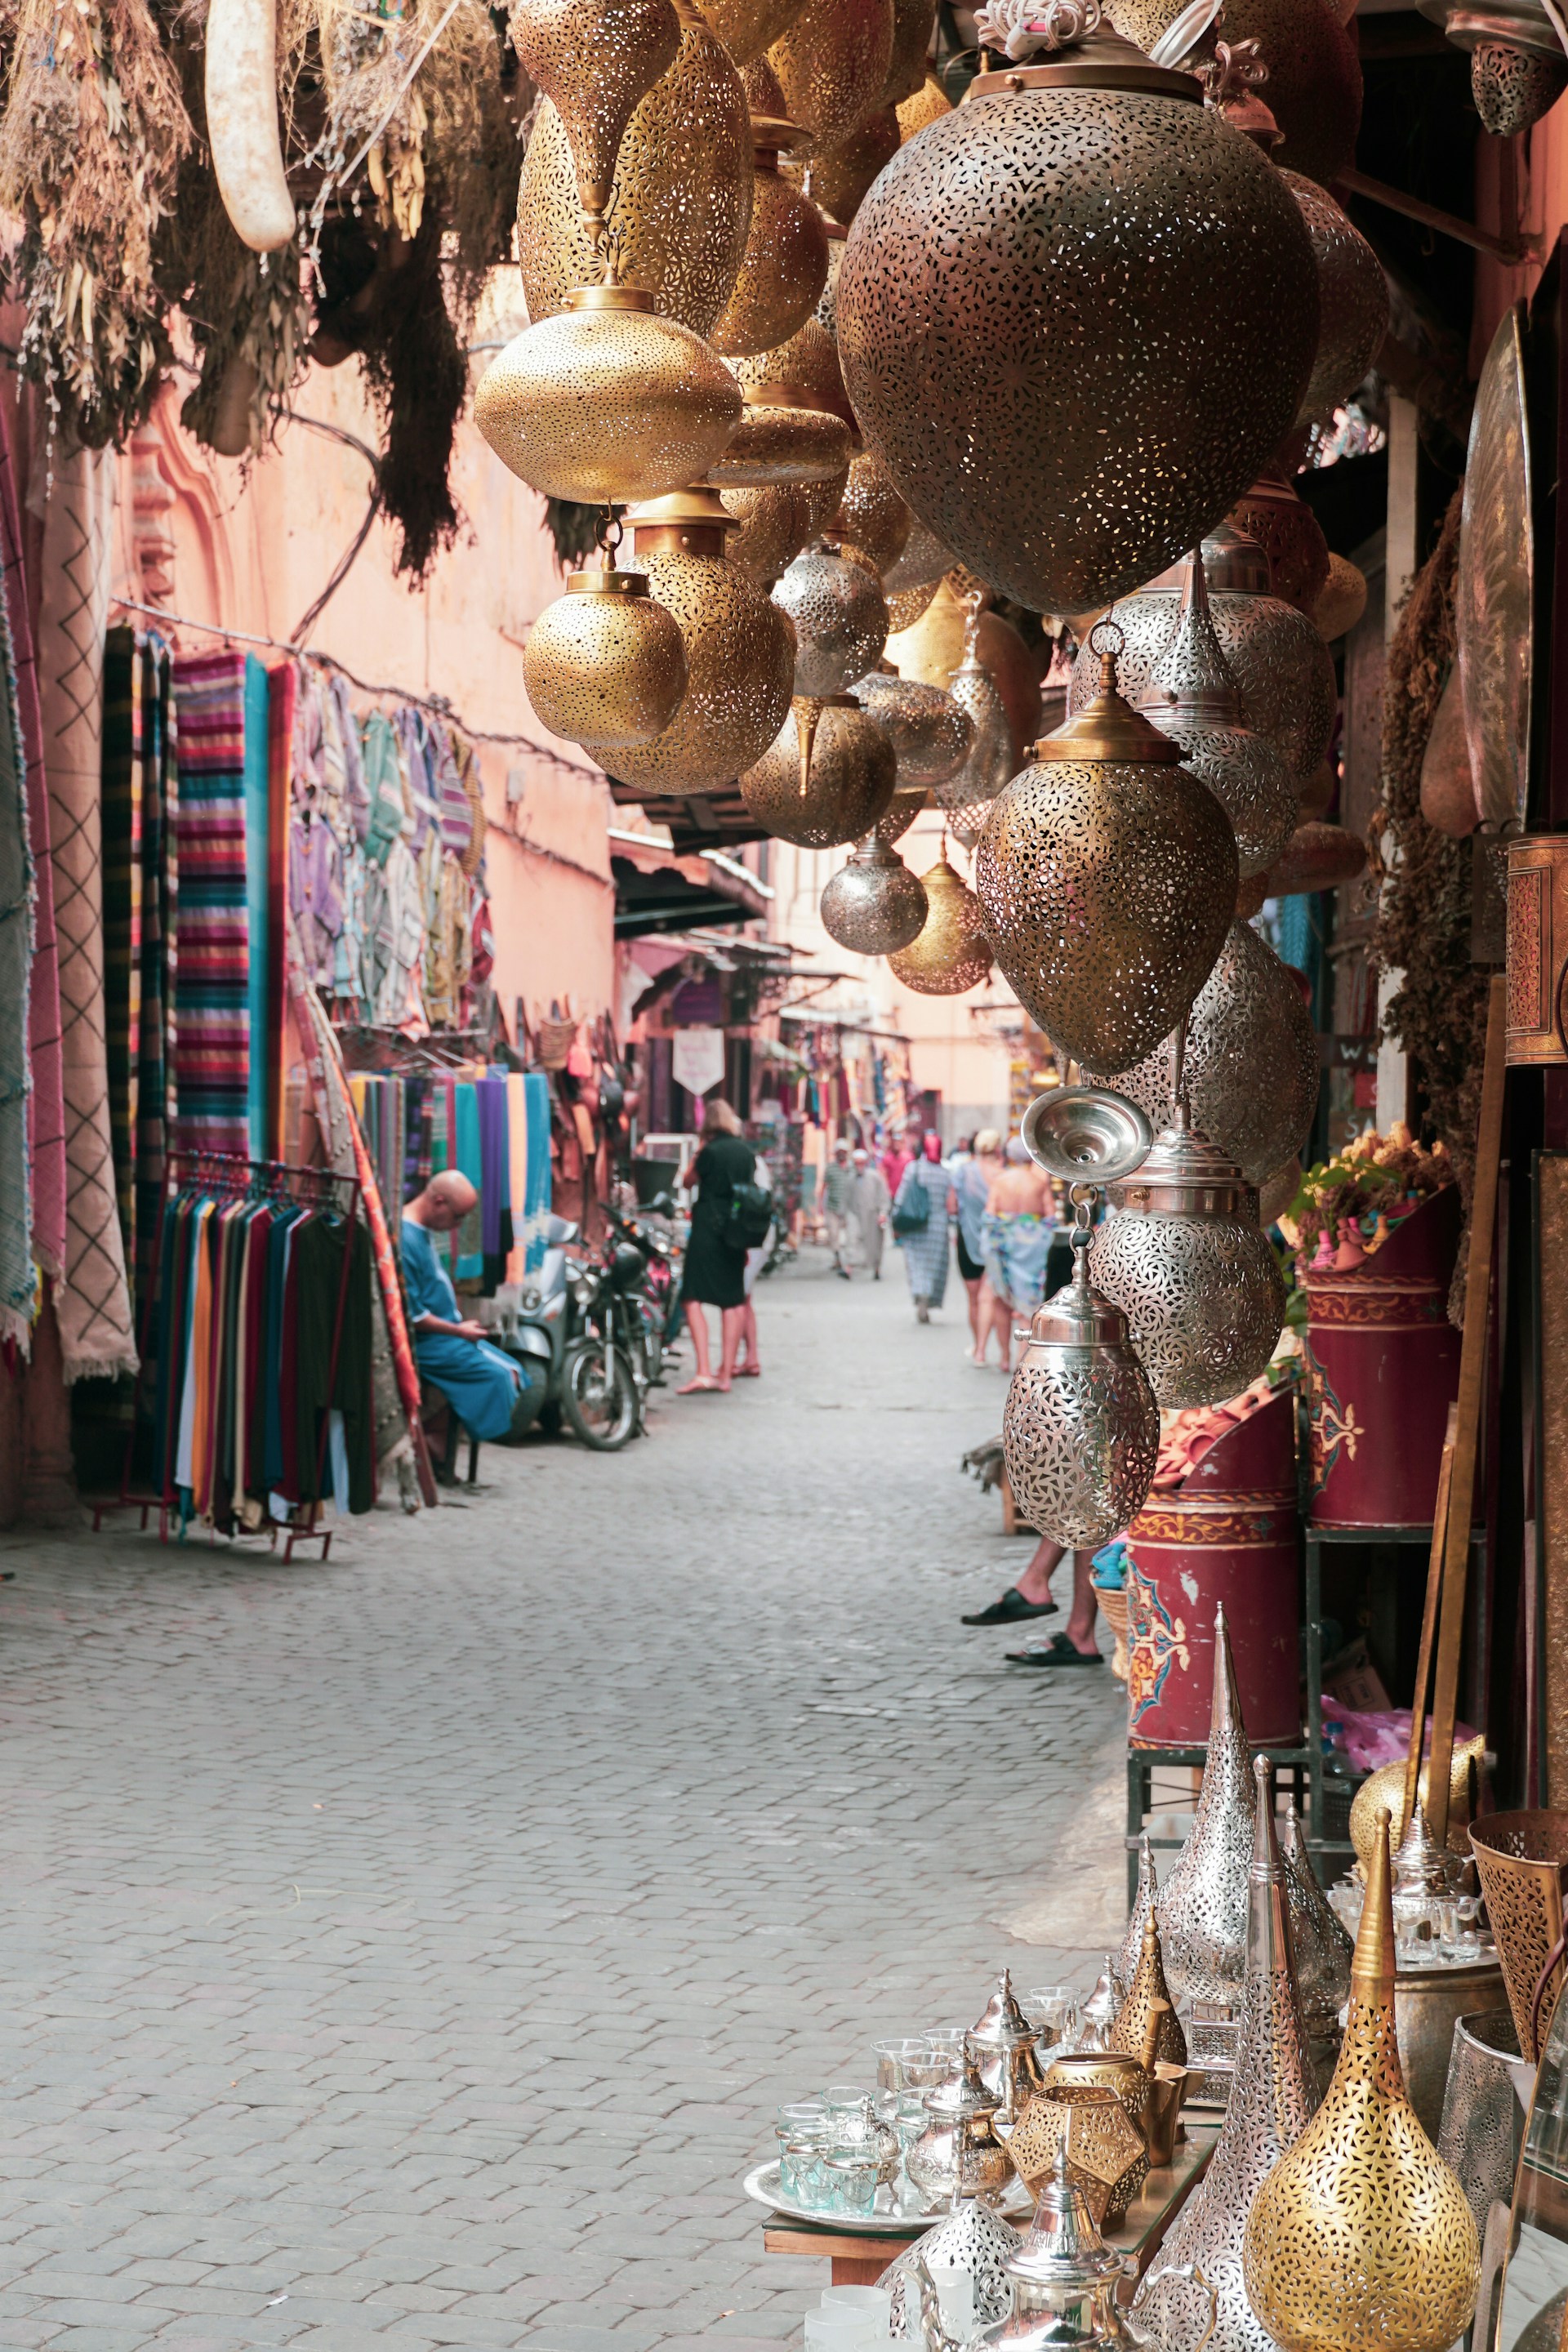 <p>Marrakech is an exotic location popular for its impressive palaces, and walled 1000-acre Agdal gardens. The place is holds a mix of many cultures and cuisines, making its markets it a diverse one of kind destination.</p>